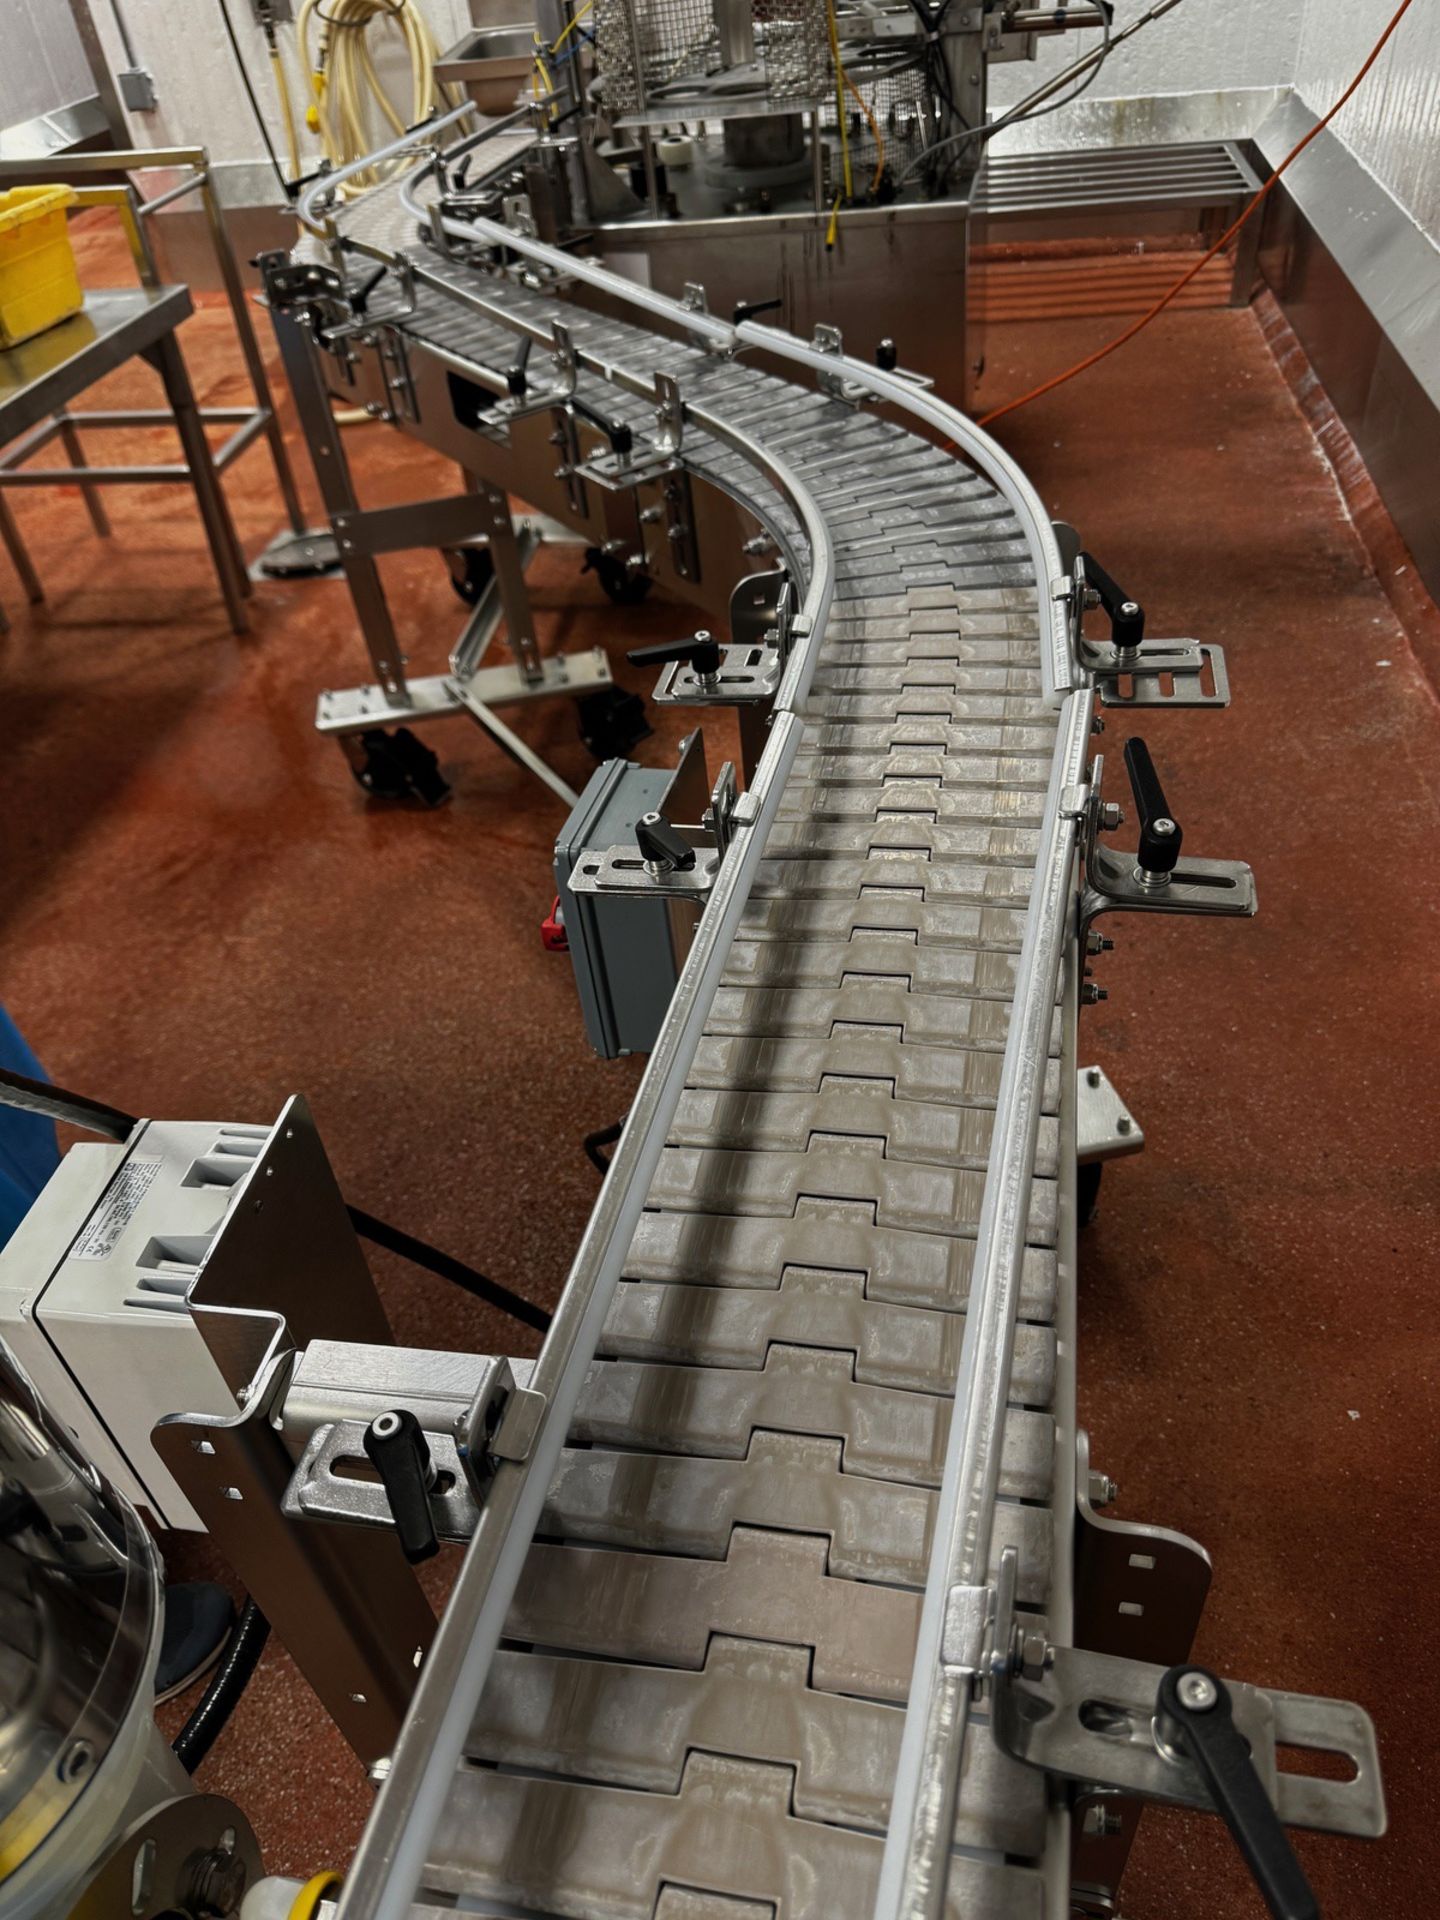 Stainless Steel Frame 8" Wide x 120" OA S-Curve Conveyor Belt with Stainless Drive and Variable Spee - Image 3 of 7